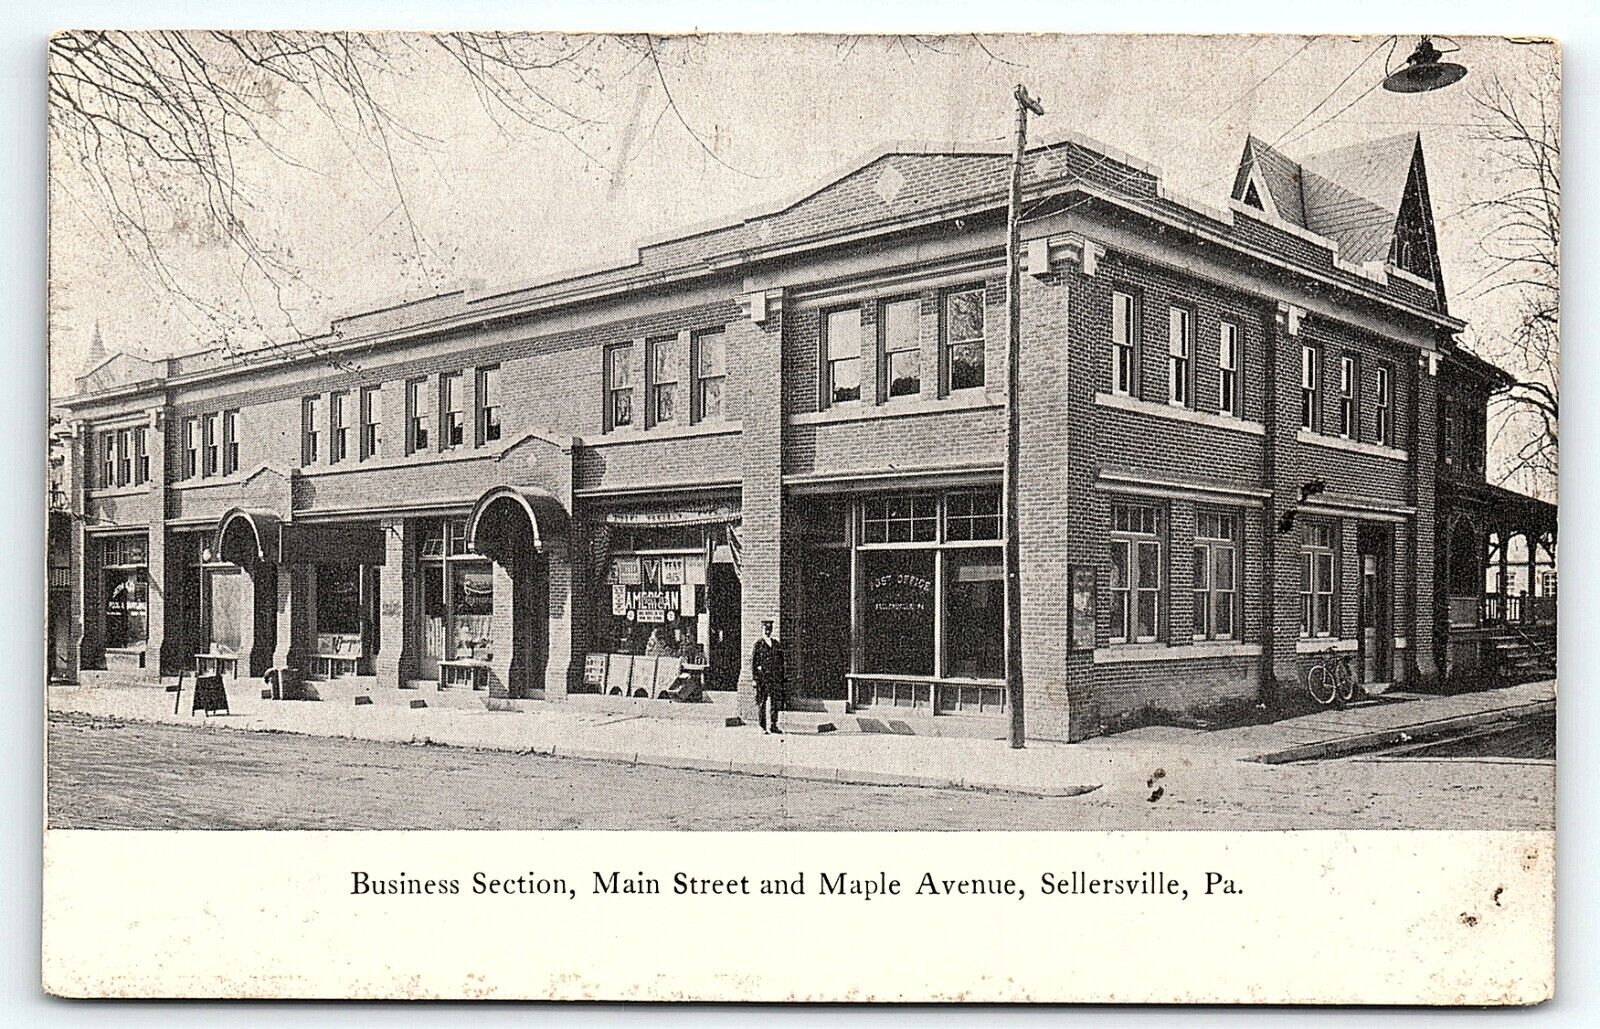 c1910 SELLERSVILLE PA BUSINESS SECTION MAIN STREET AND MAPLE AVE POSTCARD P4168